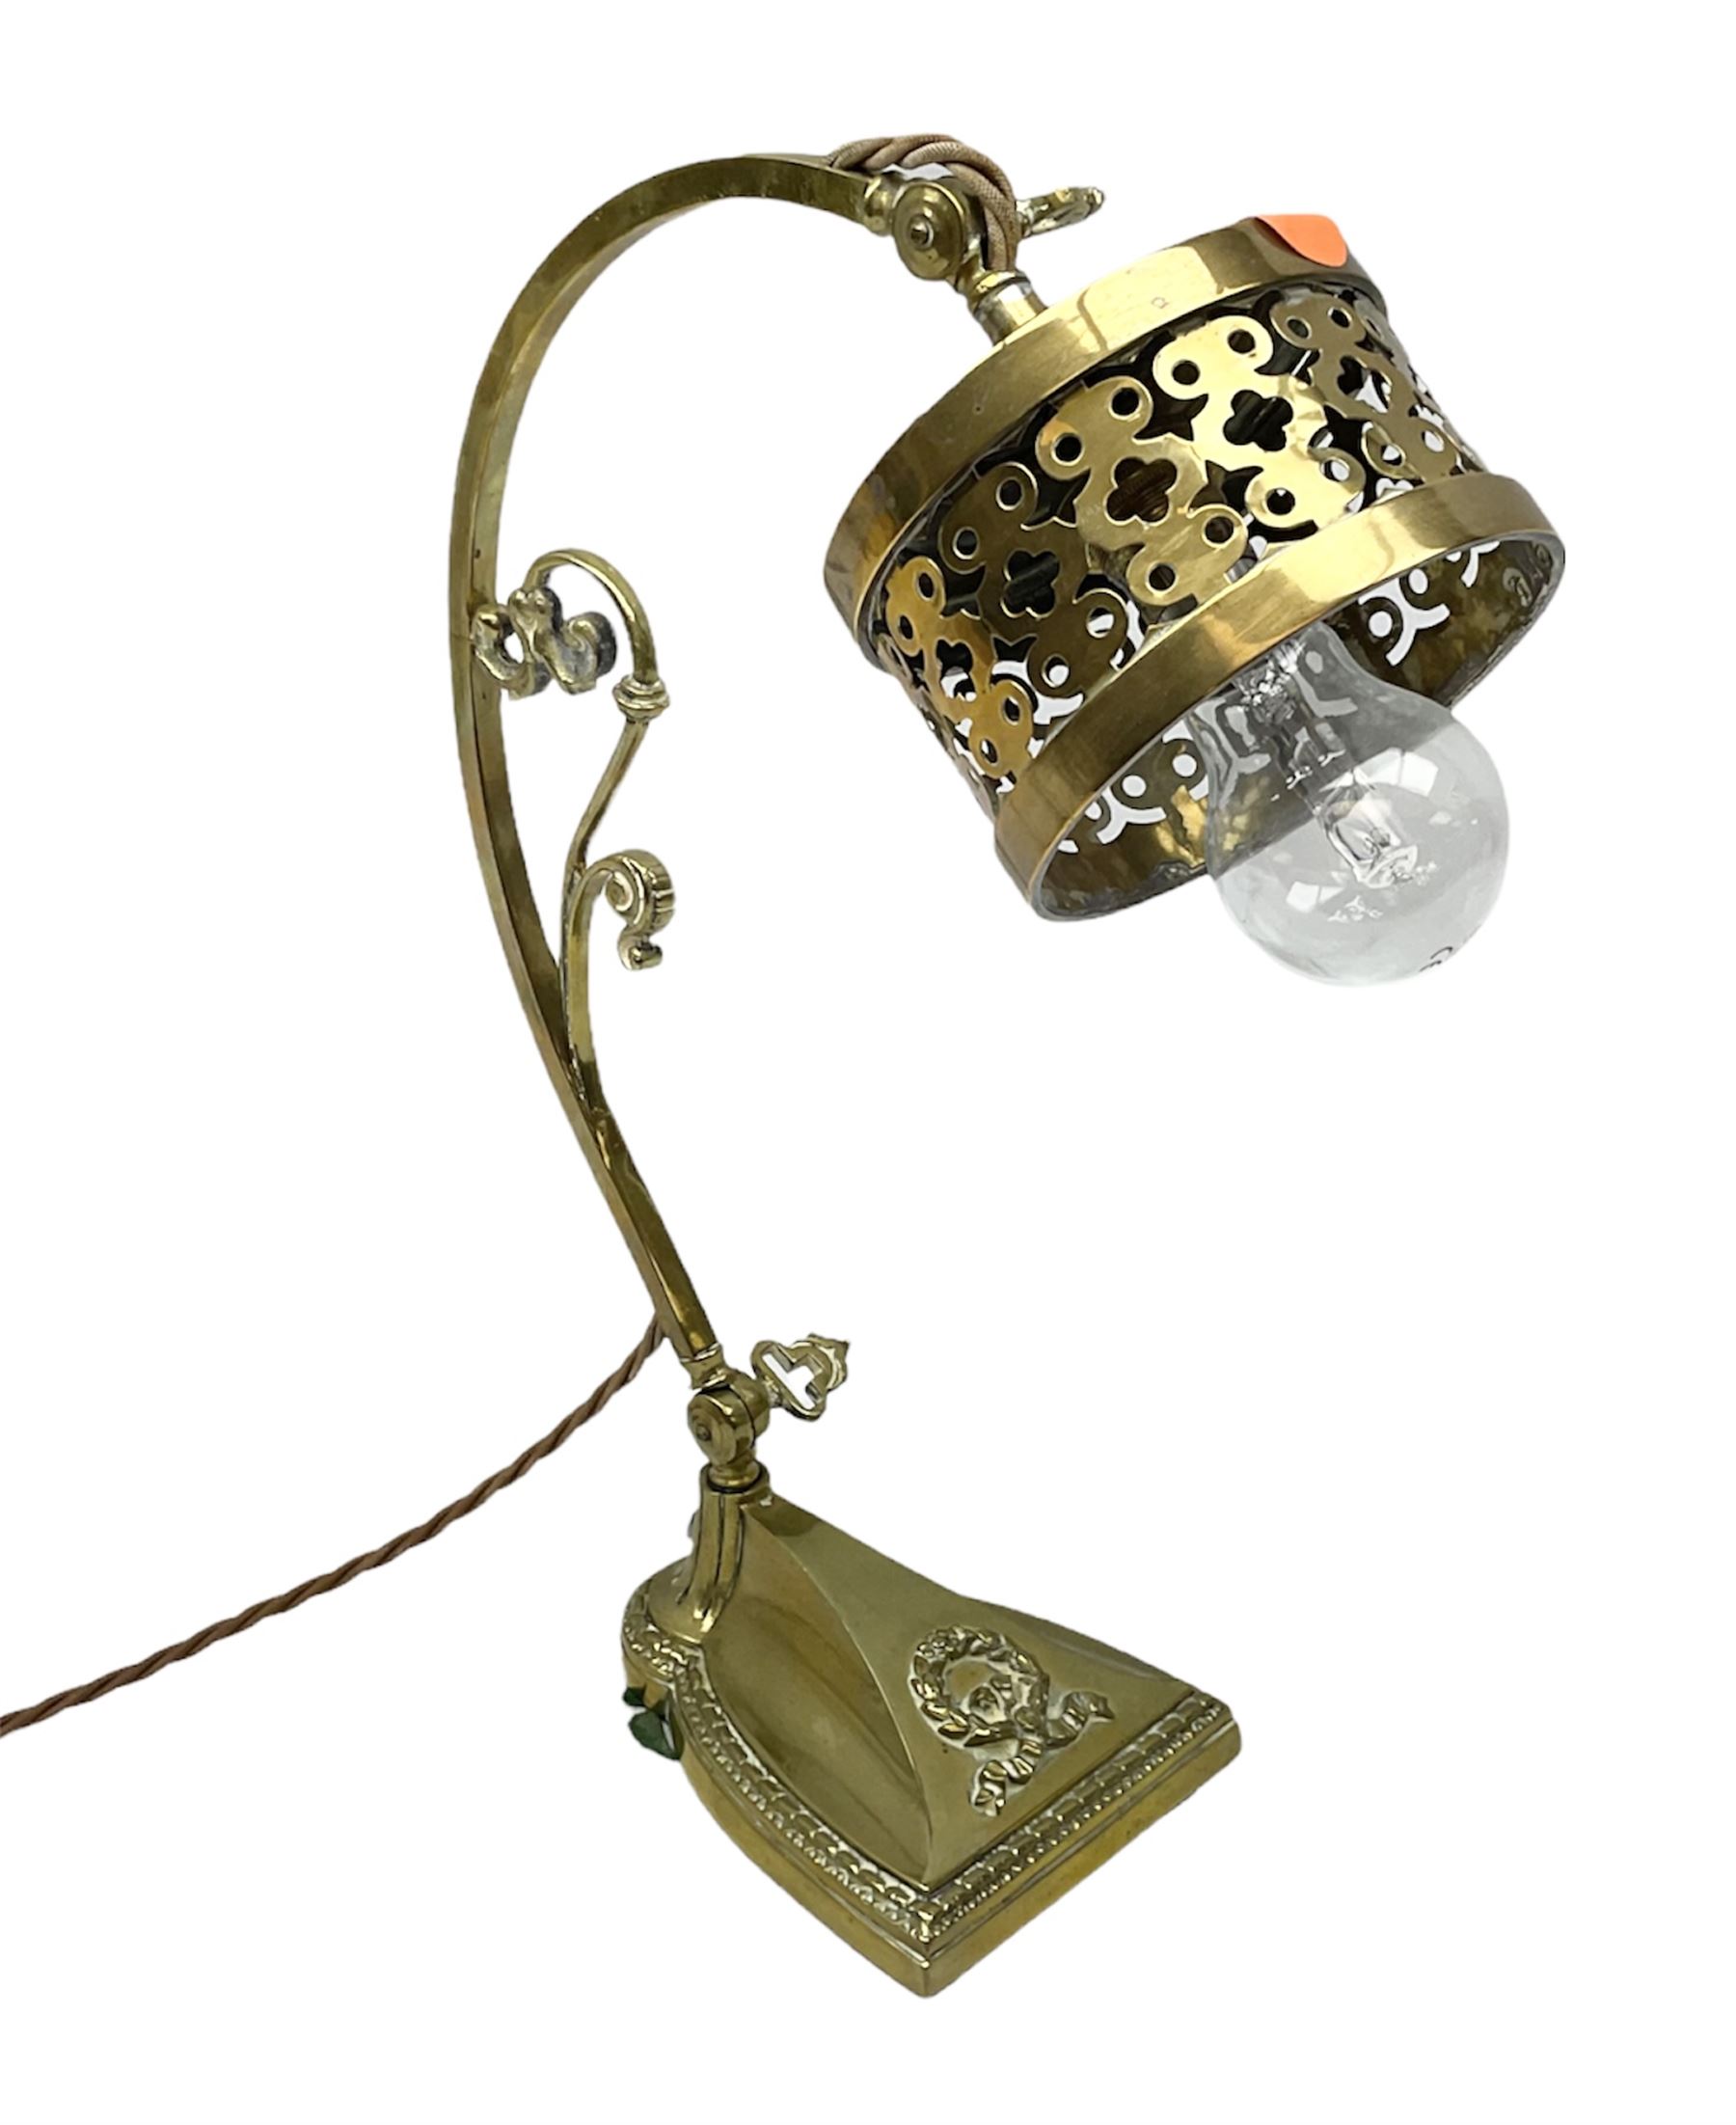 Brass adjustable wall light with a pierced shade and scroll decoration